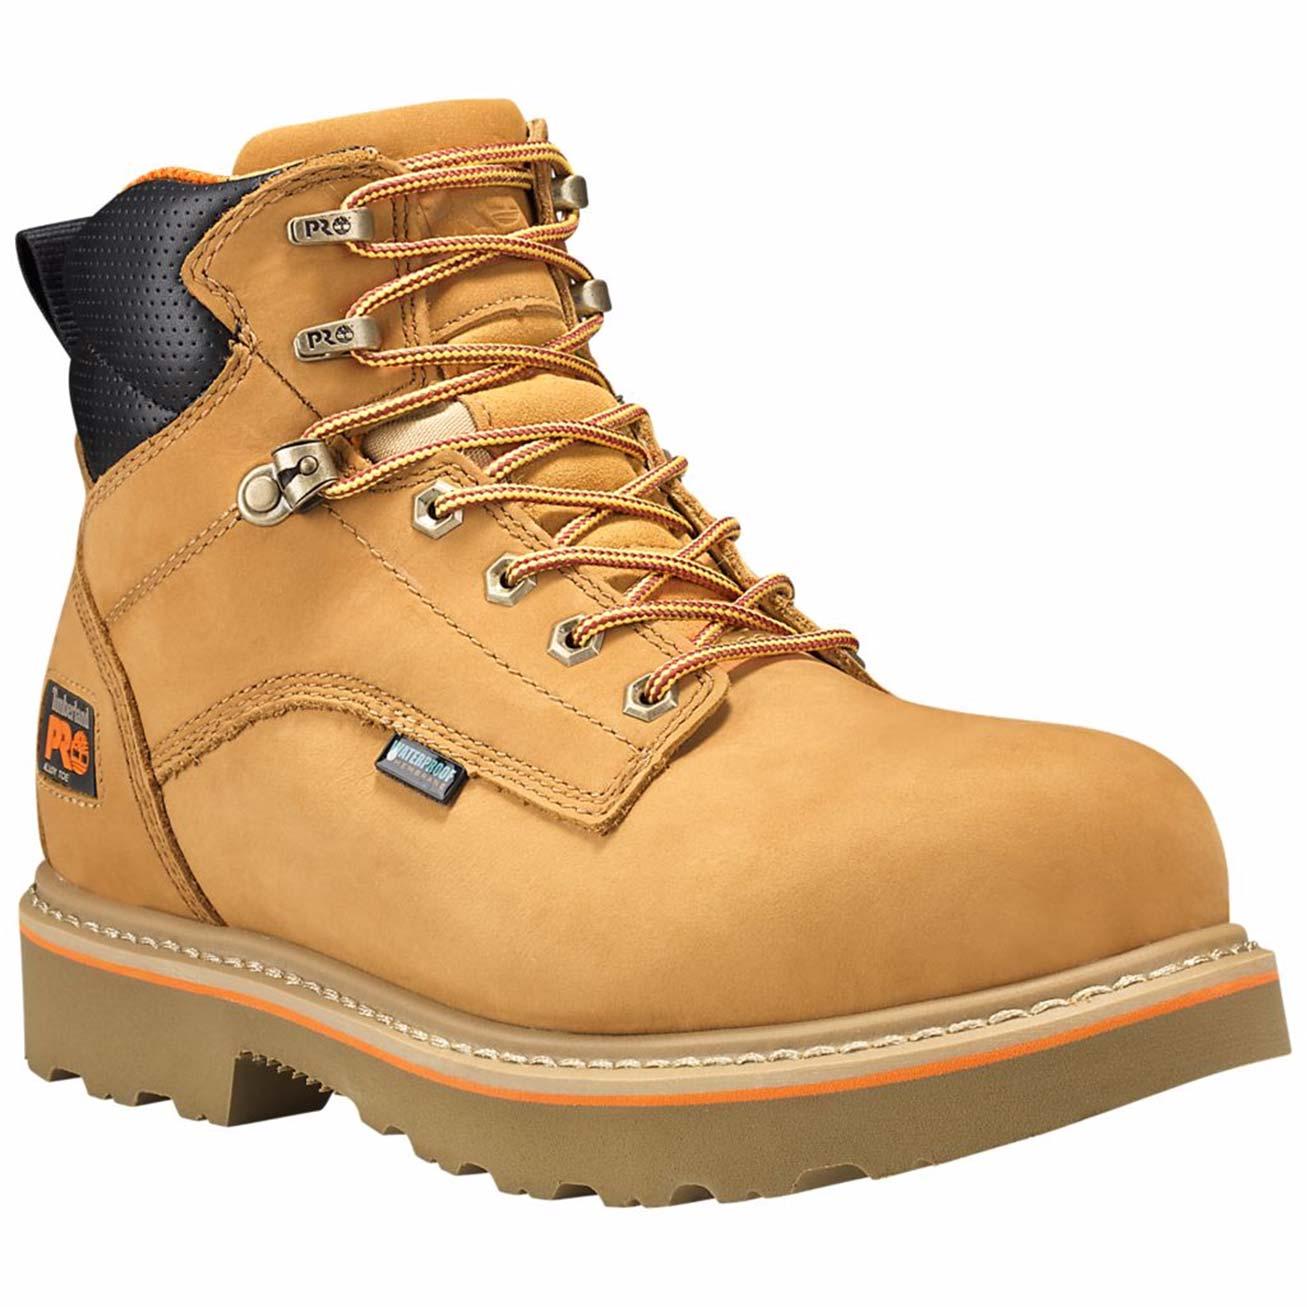 Timberland PRO Ascender Alloy Toe Waterproof Work Boot, A174E231